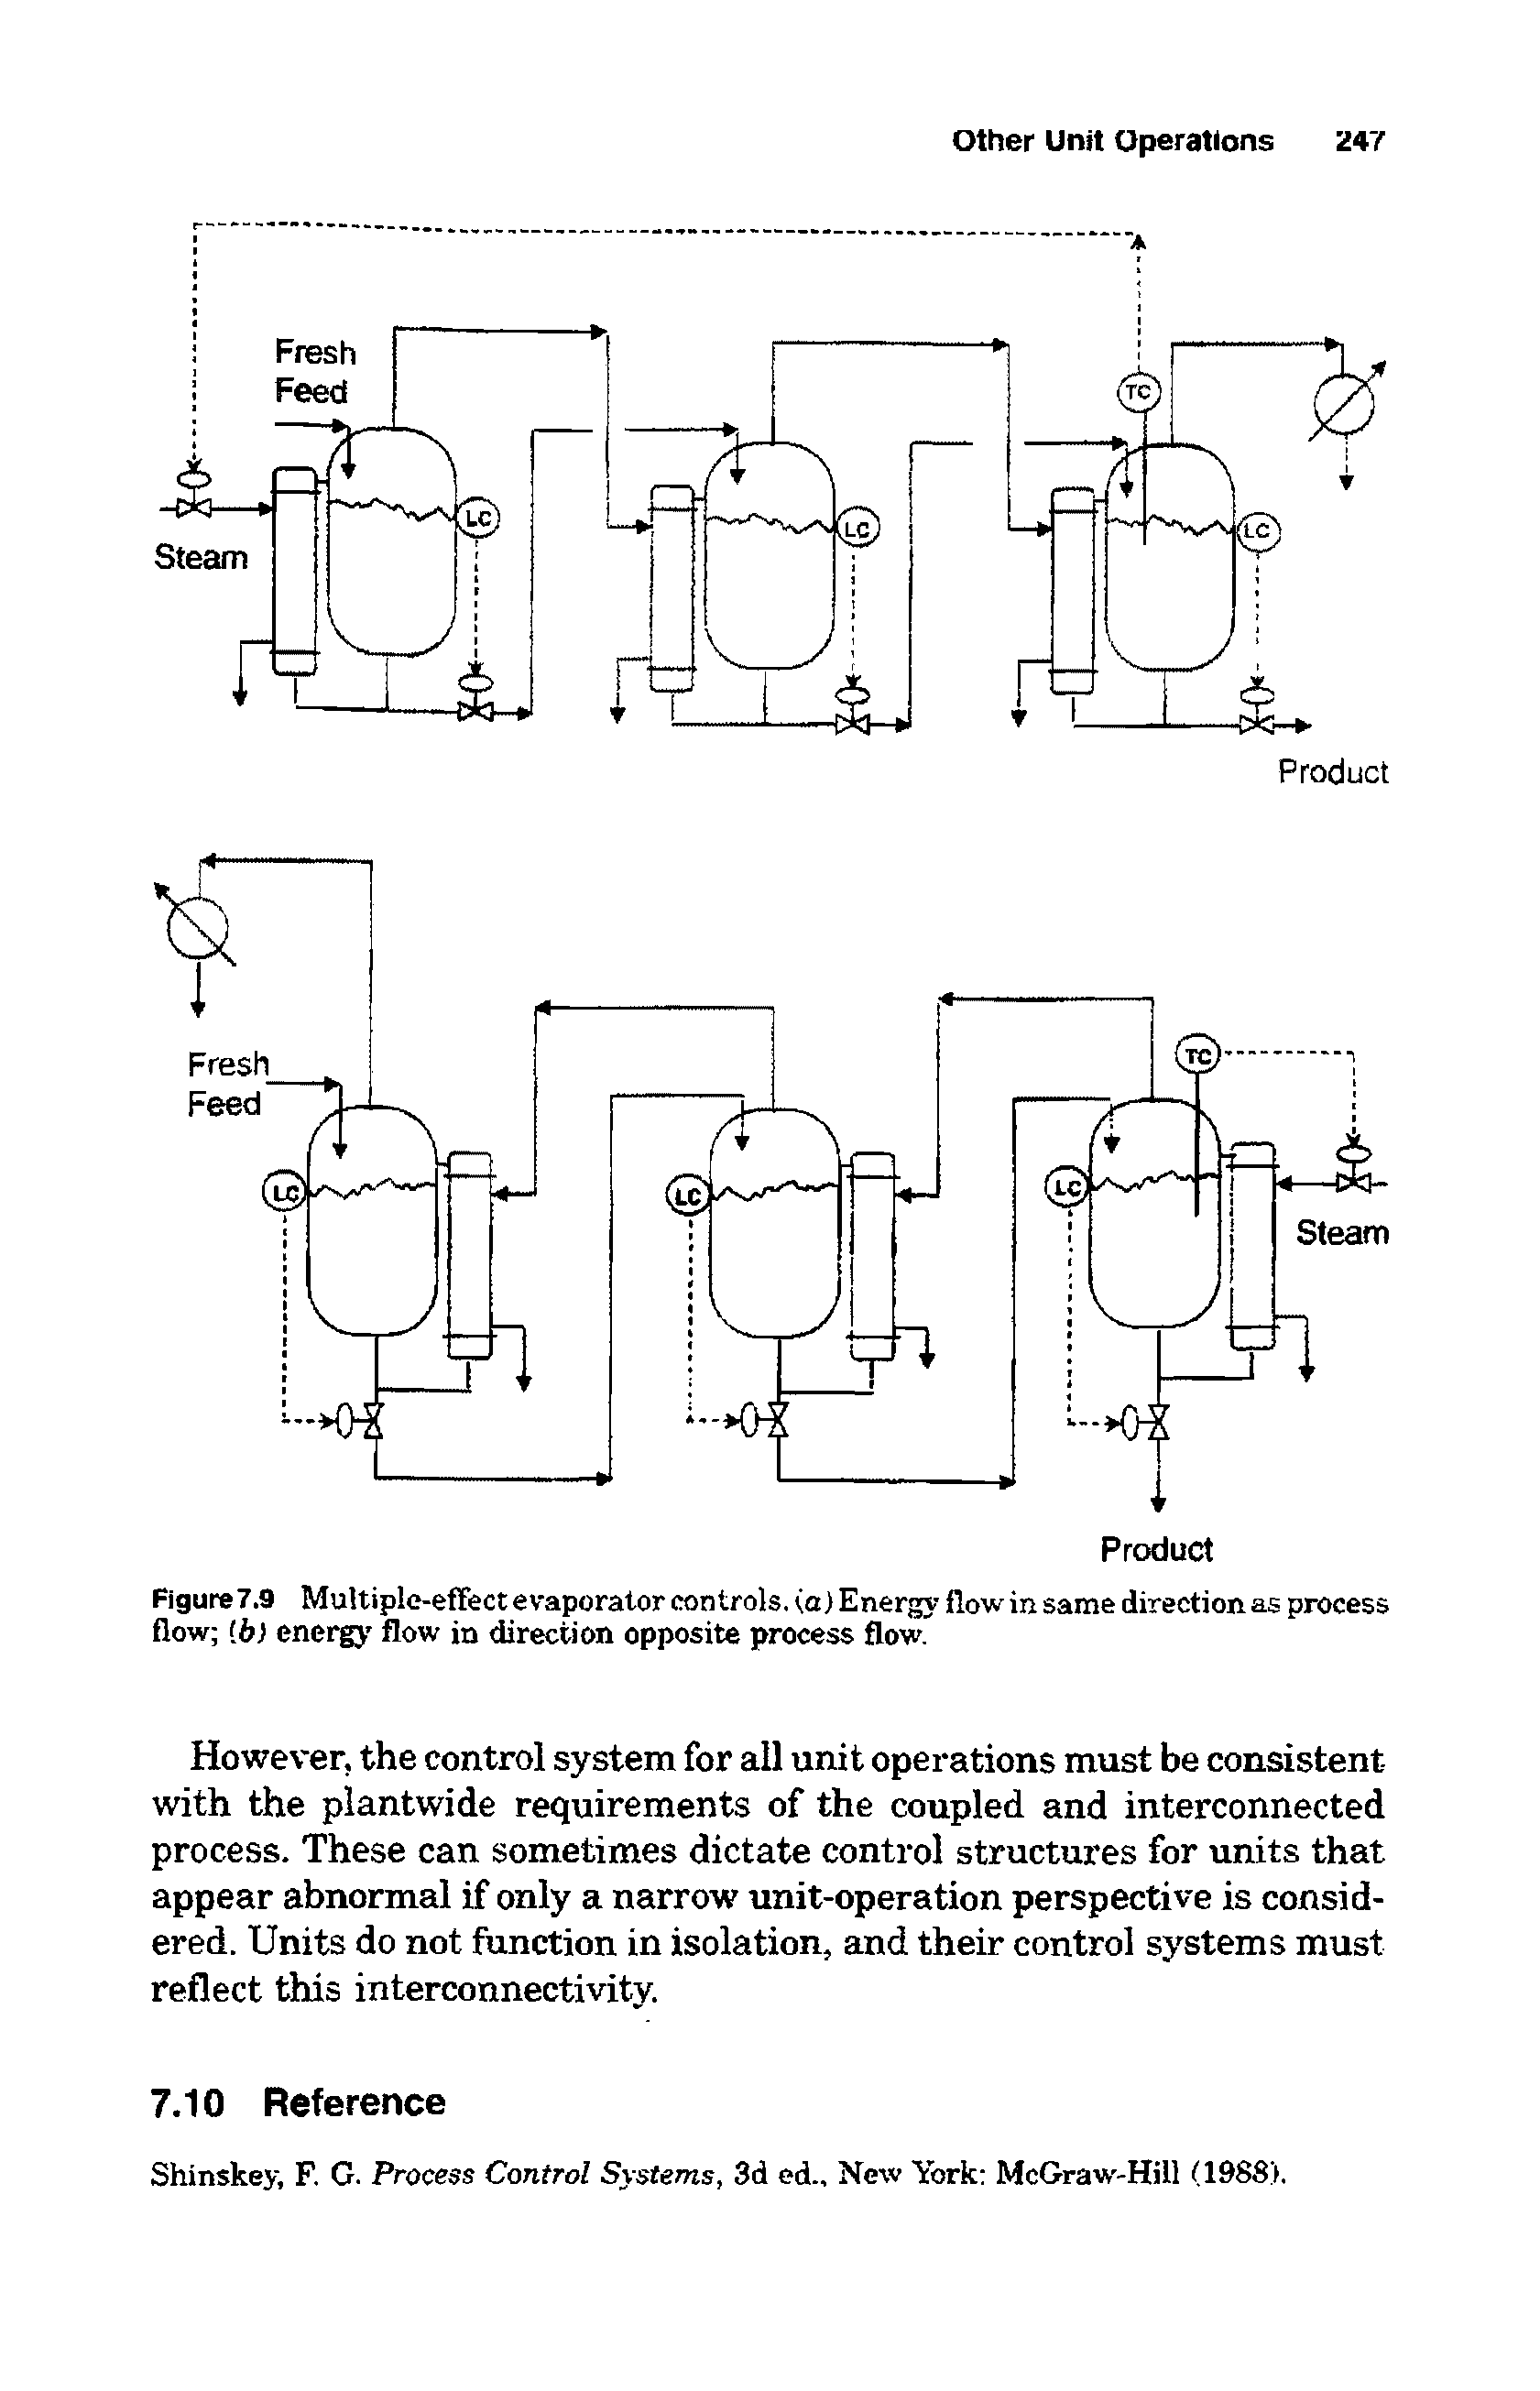 Figure7.9 Multiple-effect evaporator controls, (a) Energy flow in same direction as process flow <b) energy flow in direction opposite process flow.